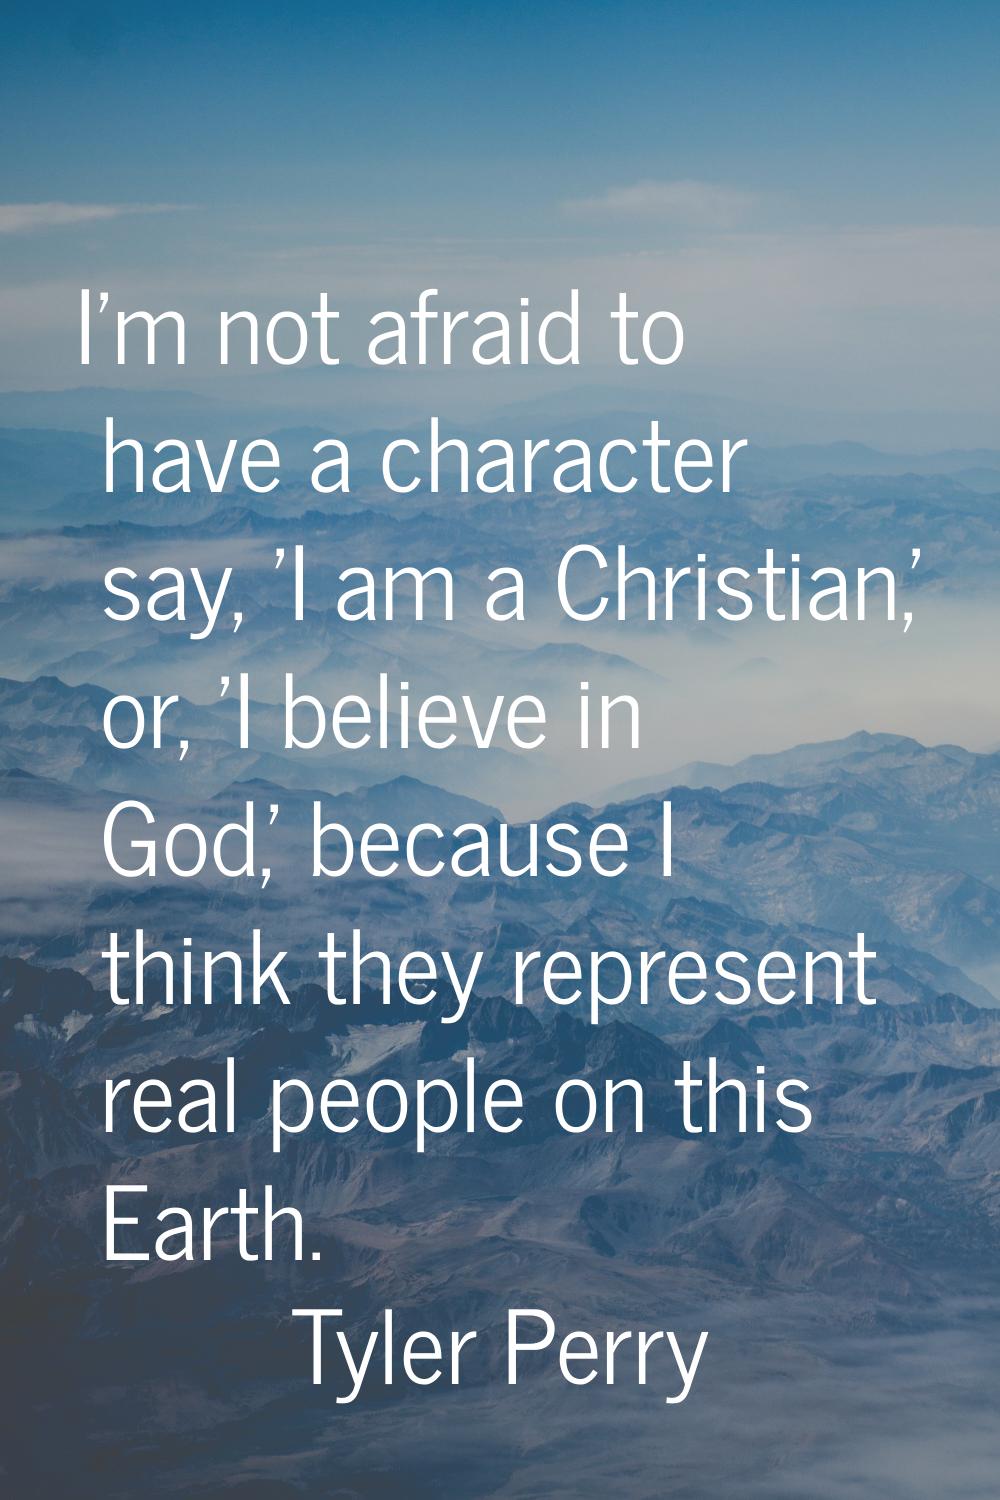 I'm not afraid to have a character say, 'I am a Christian,' or, 'I believe in God,' because I think